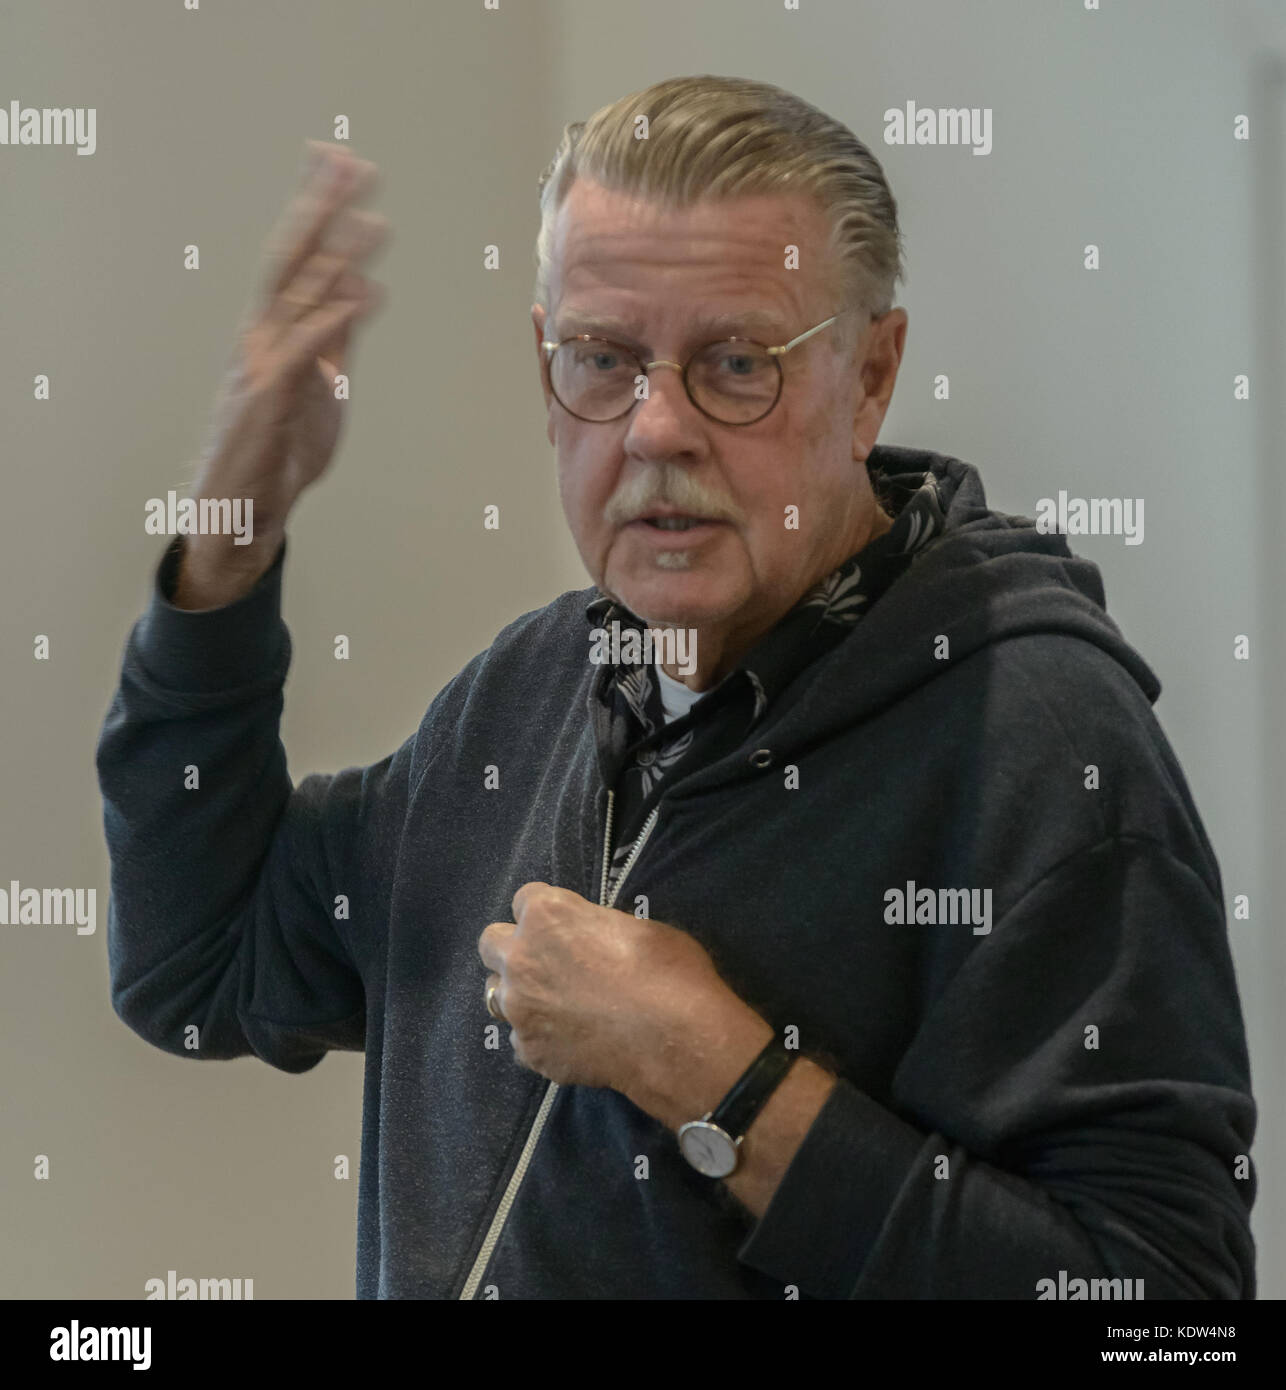 Malmö, Sweden. 16th October, 2017. Renowned Swedish singer-songwriter and band leader Mikael Wiehe at the center of an upcoming musical show at Malmö Live about Malmö during the last 65 years. Tommy Lindholm/Alamy Live News Stock Photo